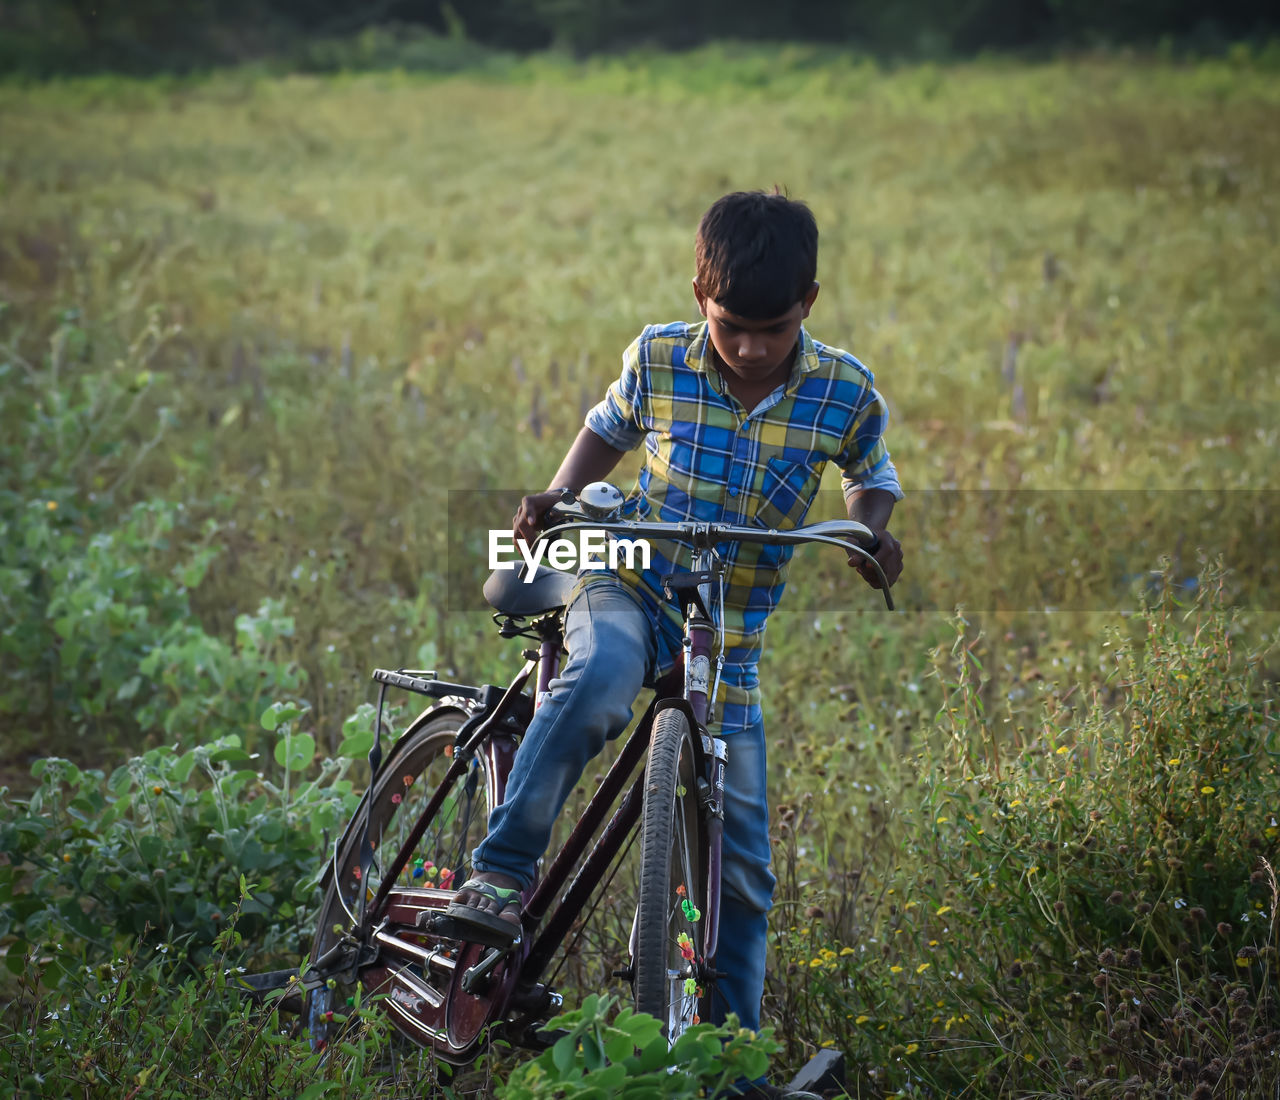 REAR VIEW OF BOY ON BICYCLE FIELD